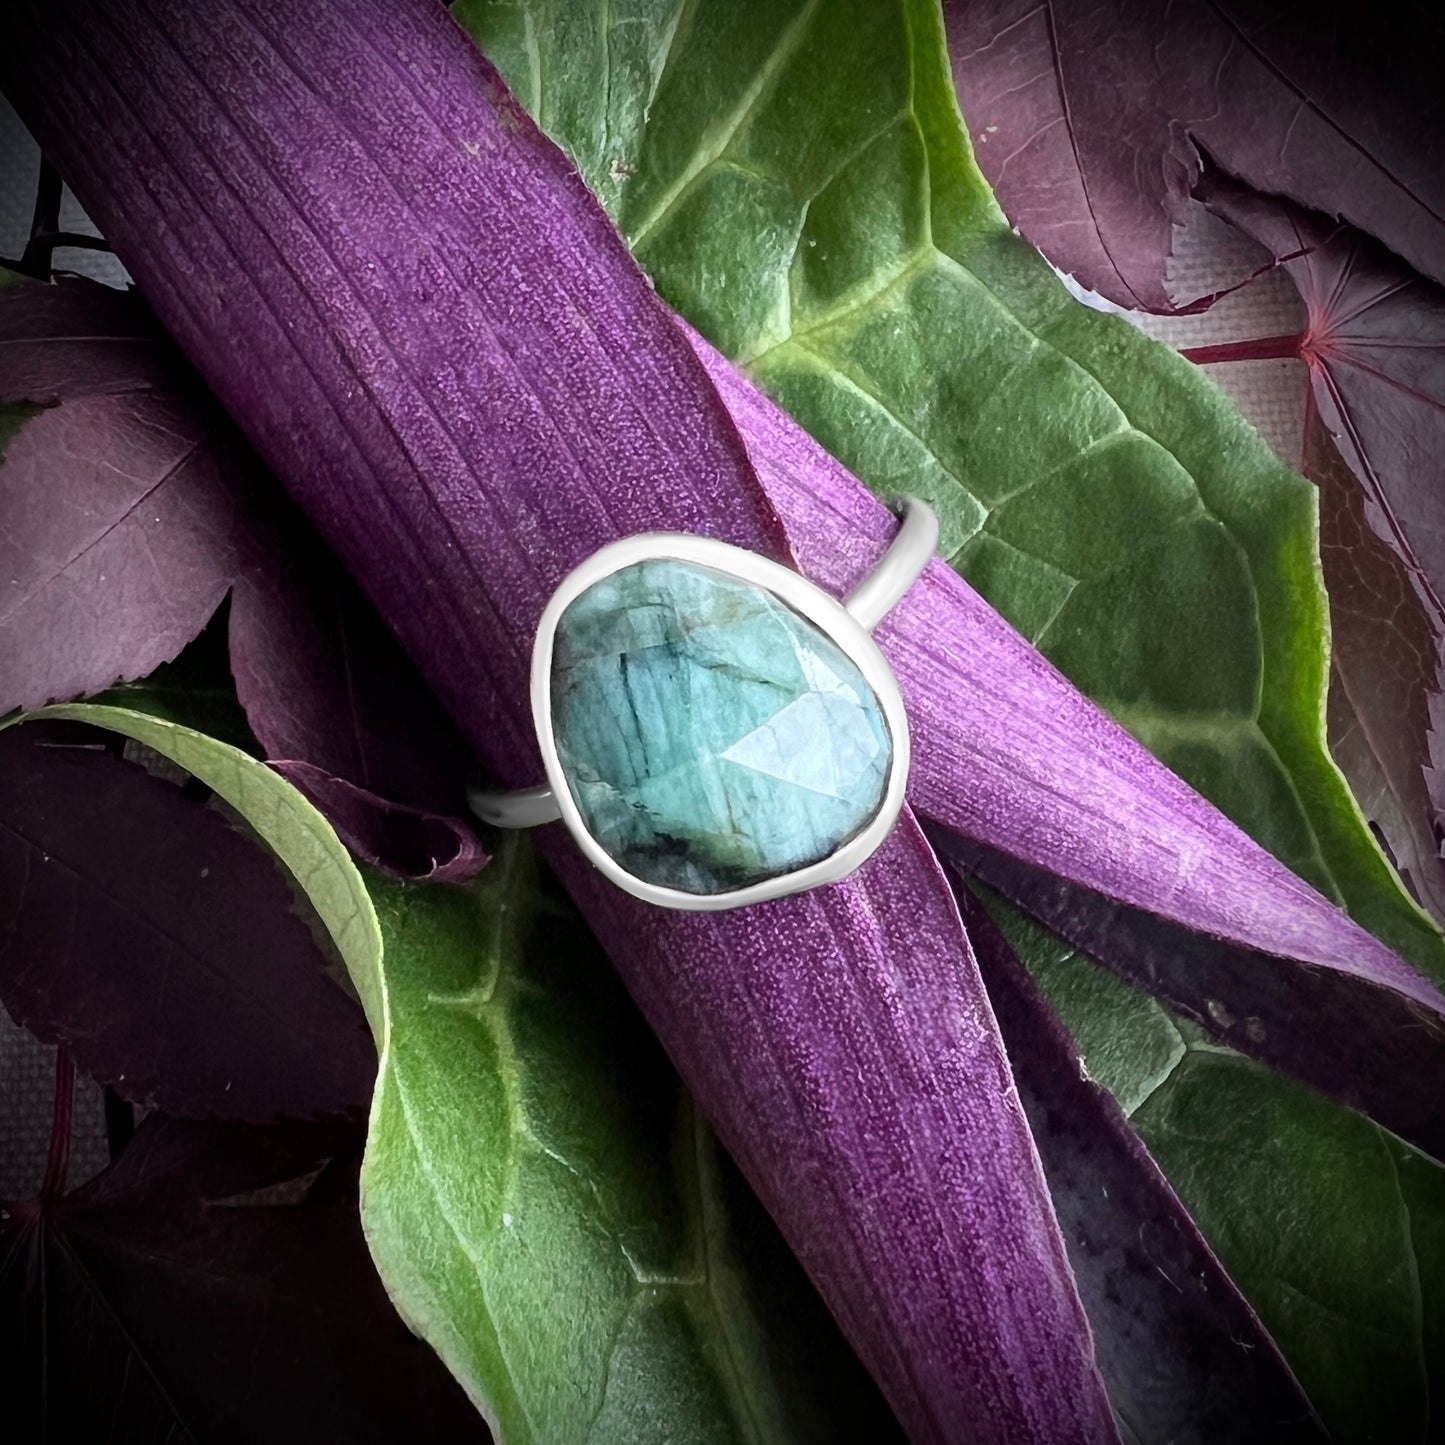 "Erin" Emerald and Sterling Silver Ring